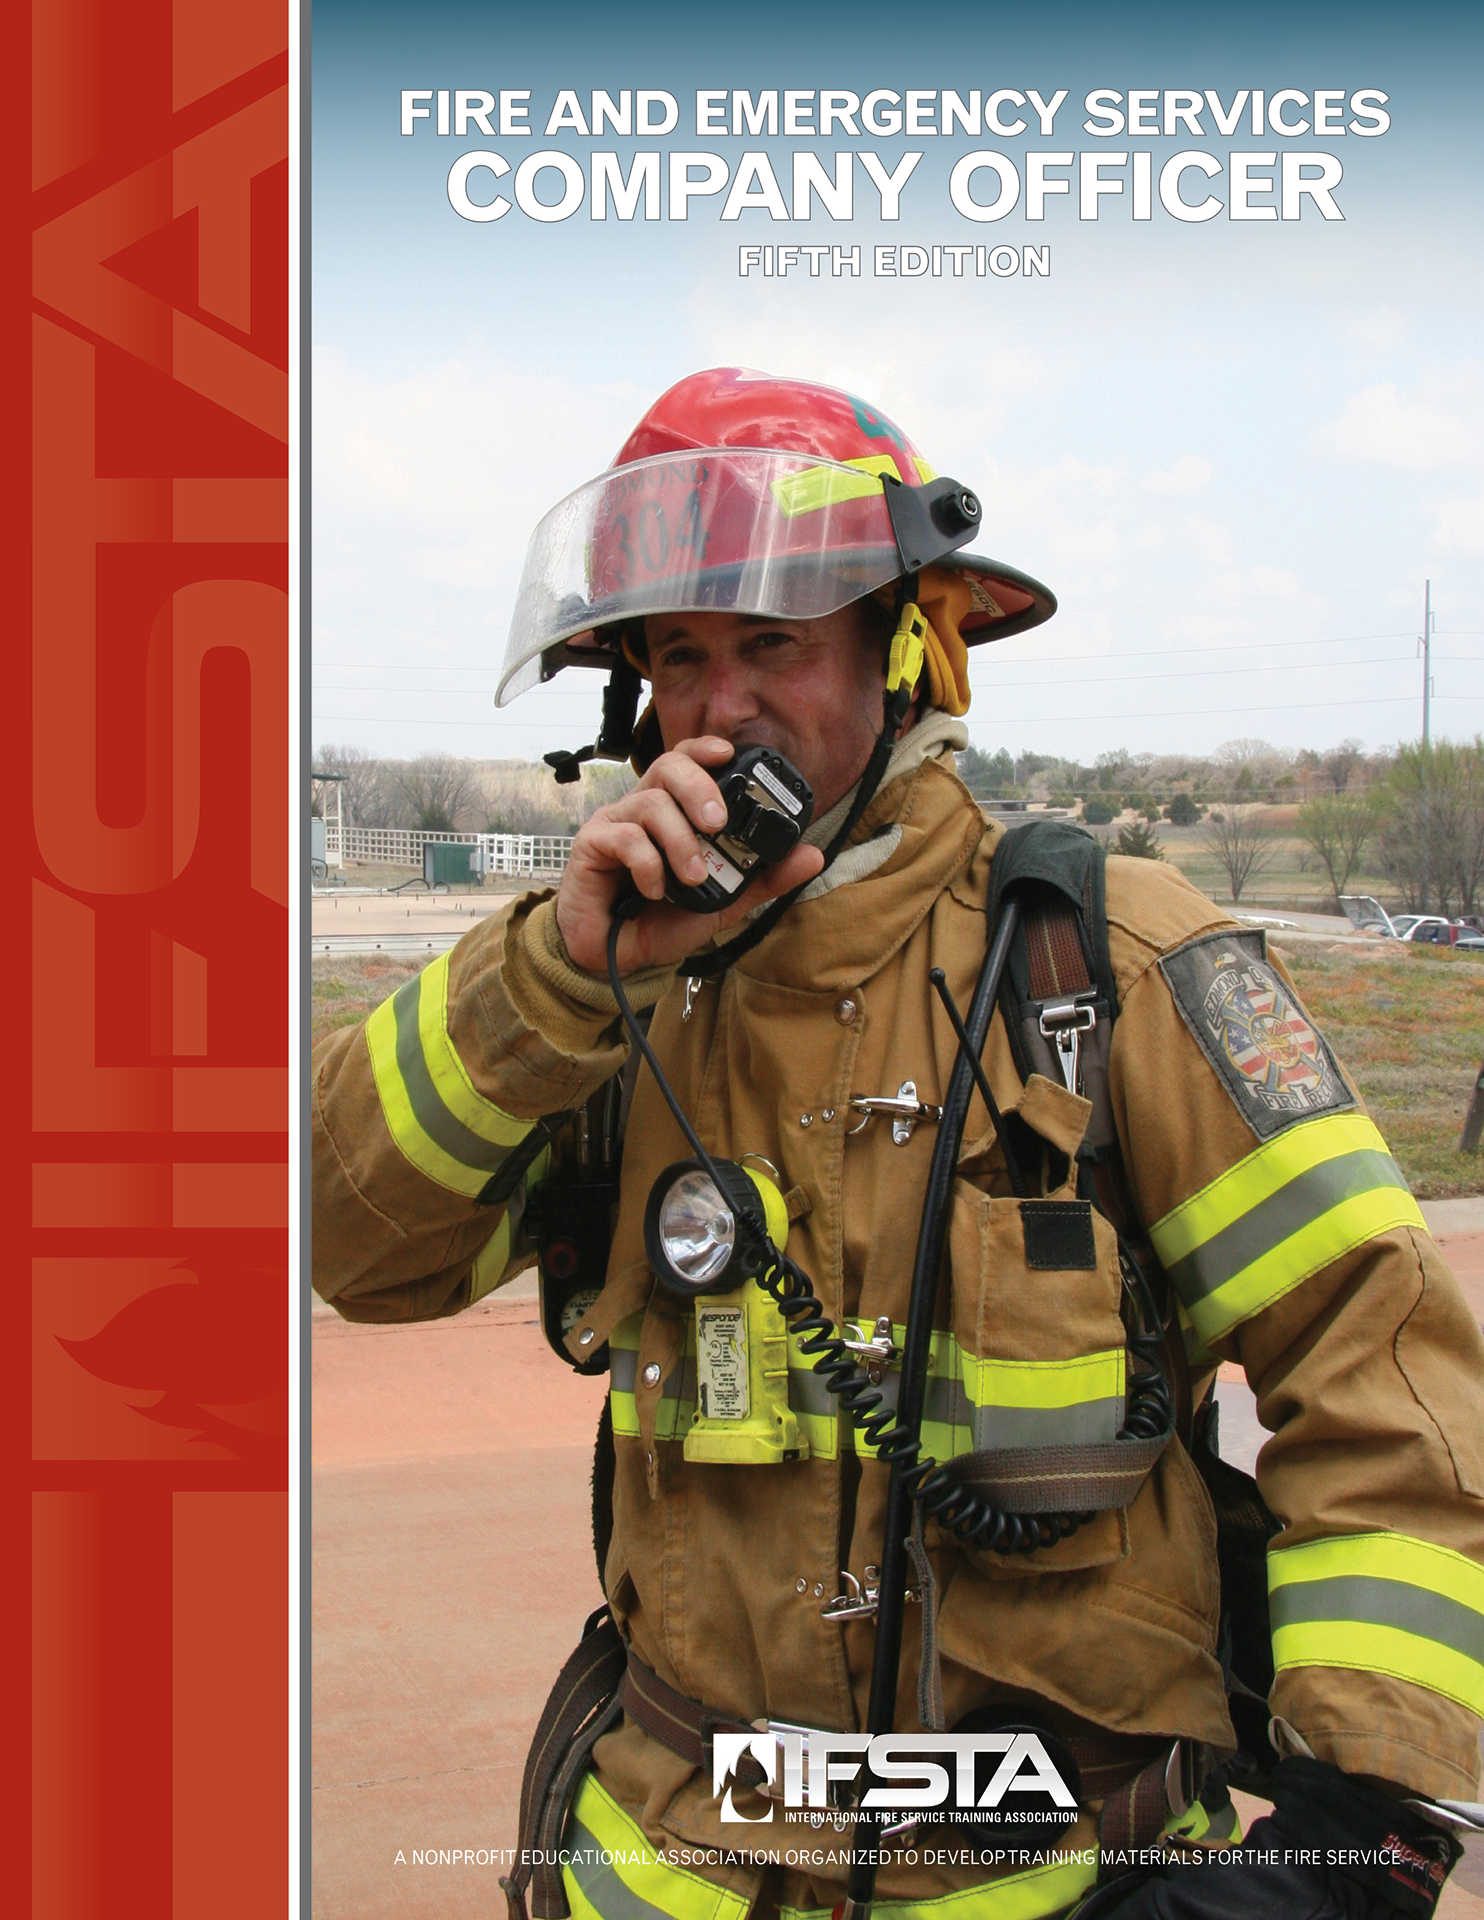 Fire and Emergency Services Company Officer, 5th Edition